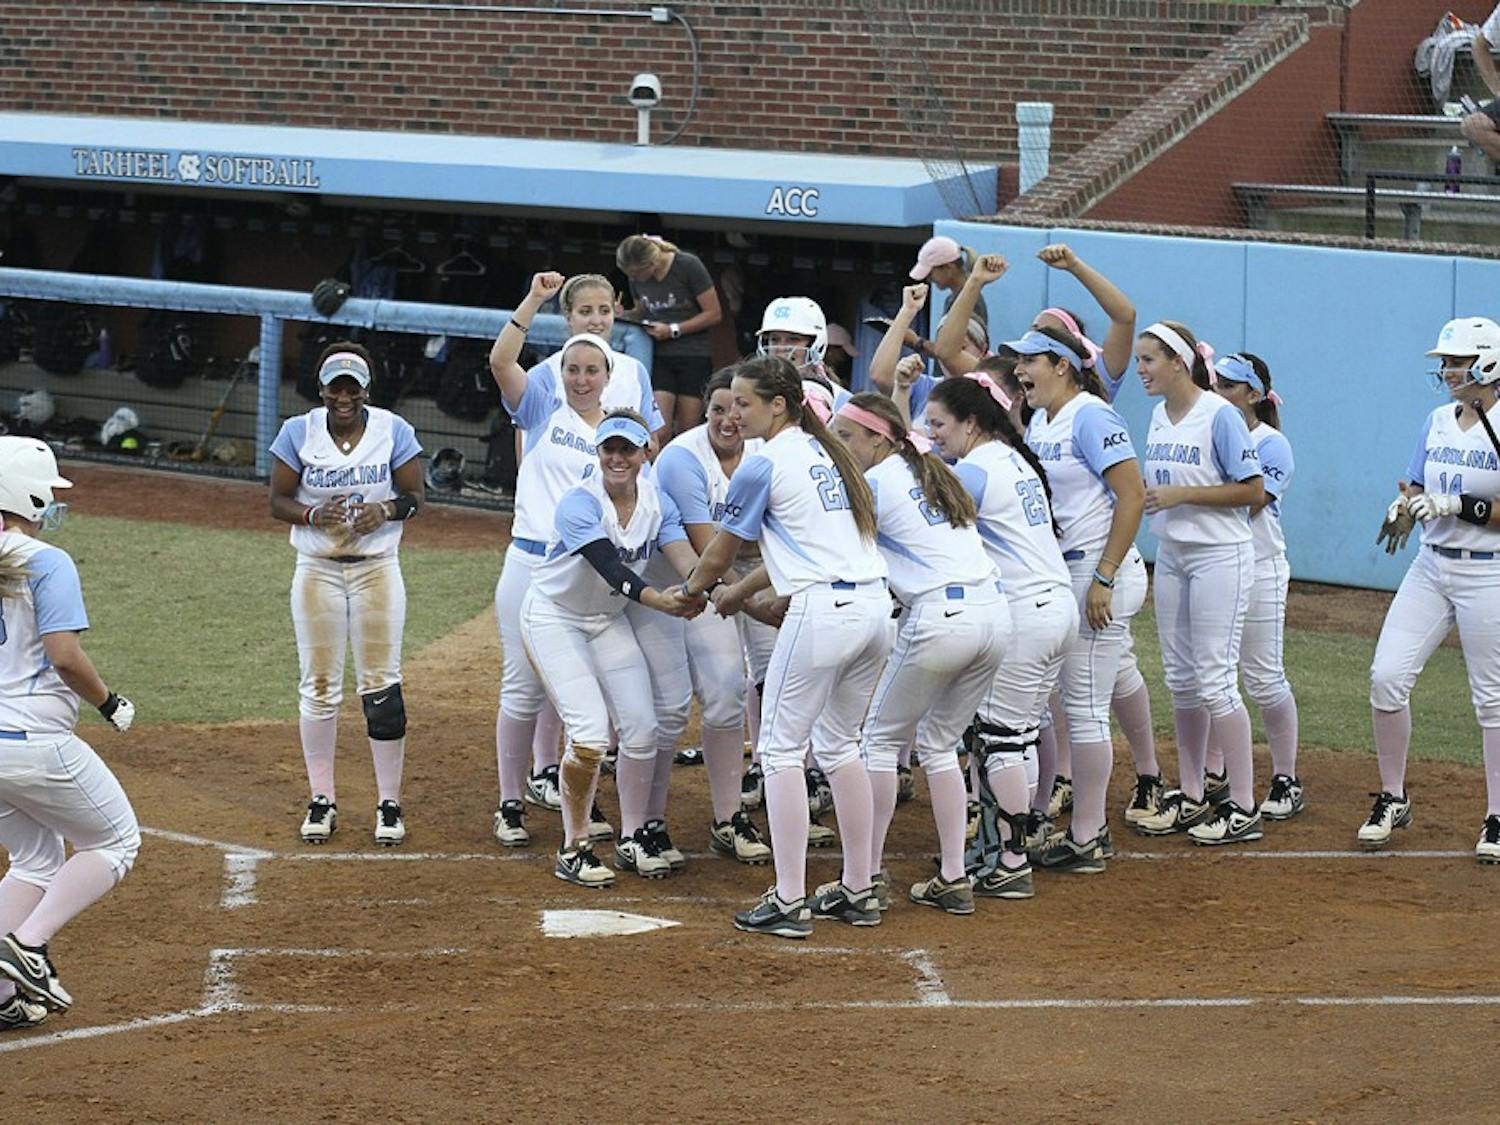 The team celebrates after Tracy Chandless, a junior from Canyon Country, California hits a home run during a preseason game against North Carolina Central University on October 8.
